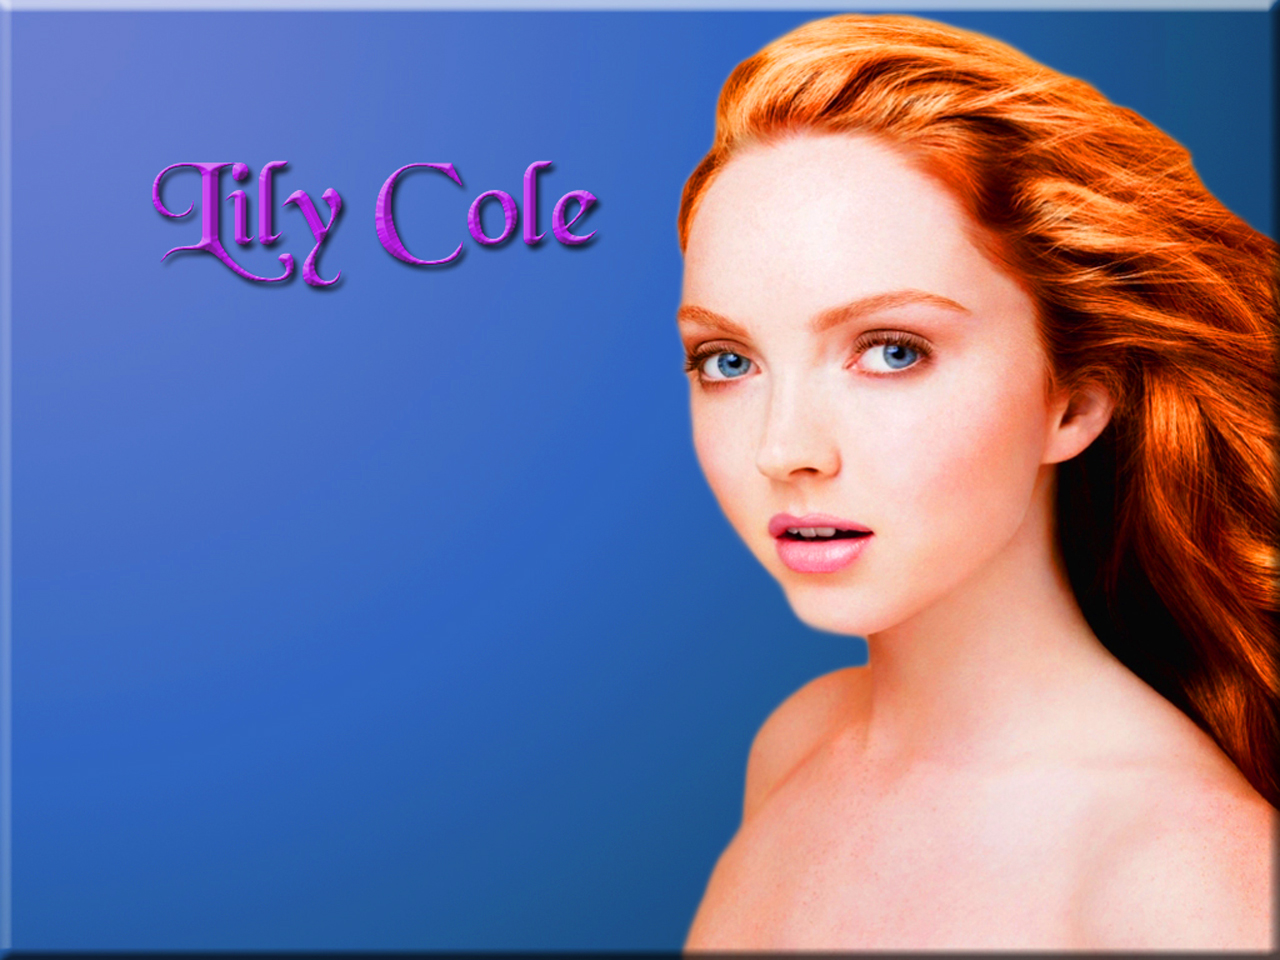 celebrity, lily cole, redhead